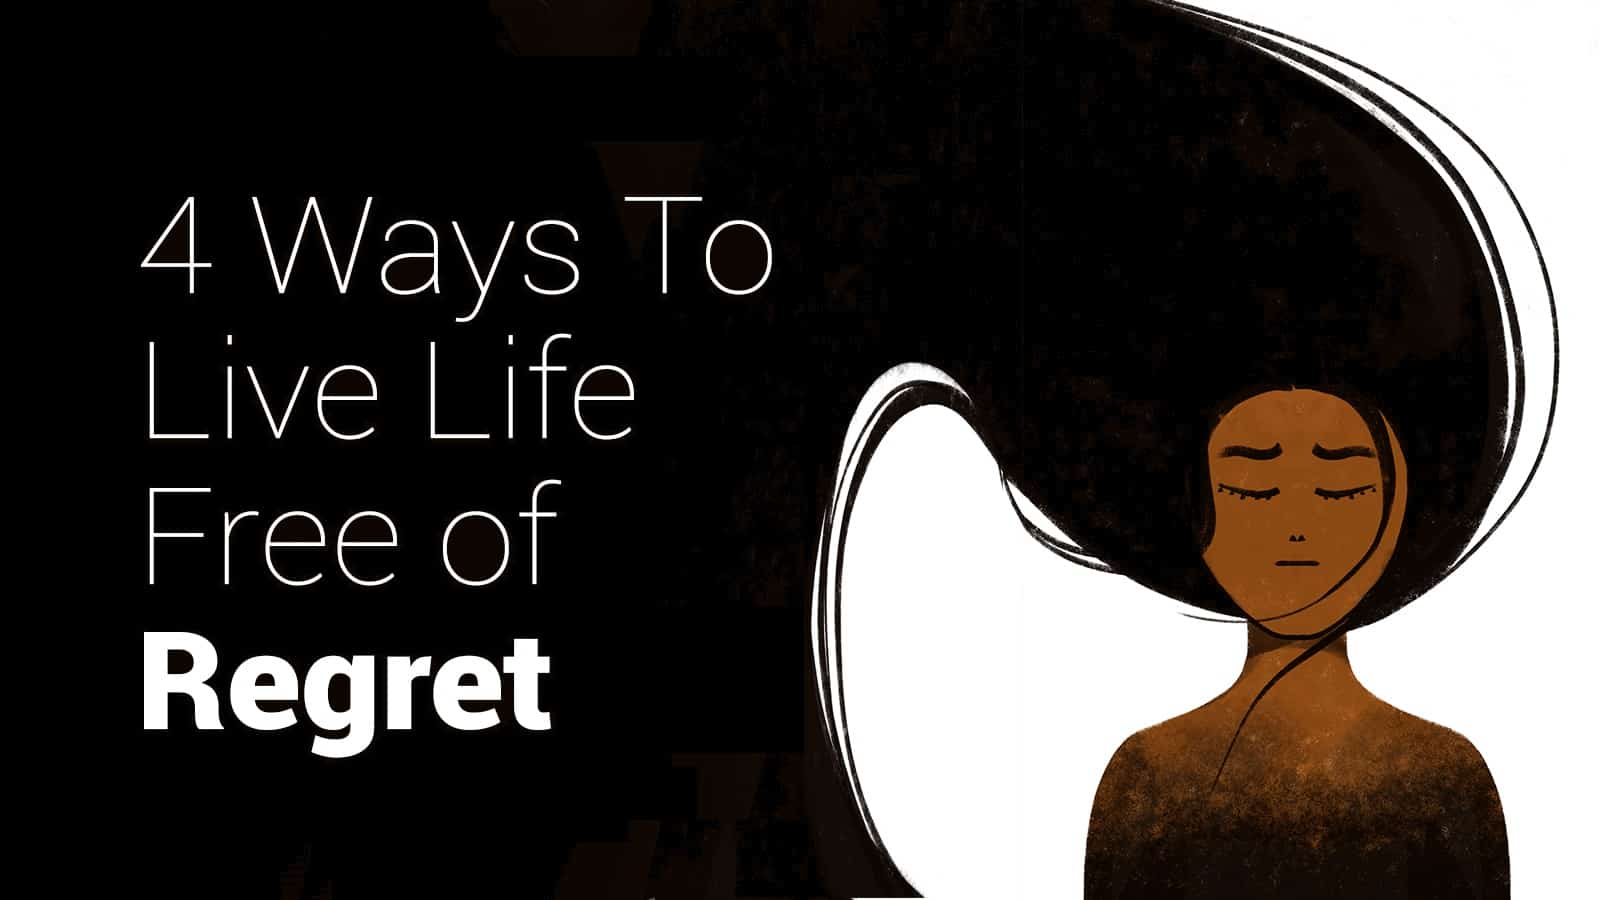 4 Ways To Live Life Free of Regret